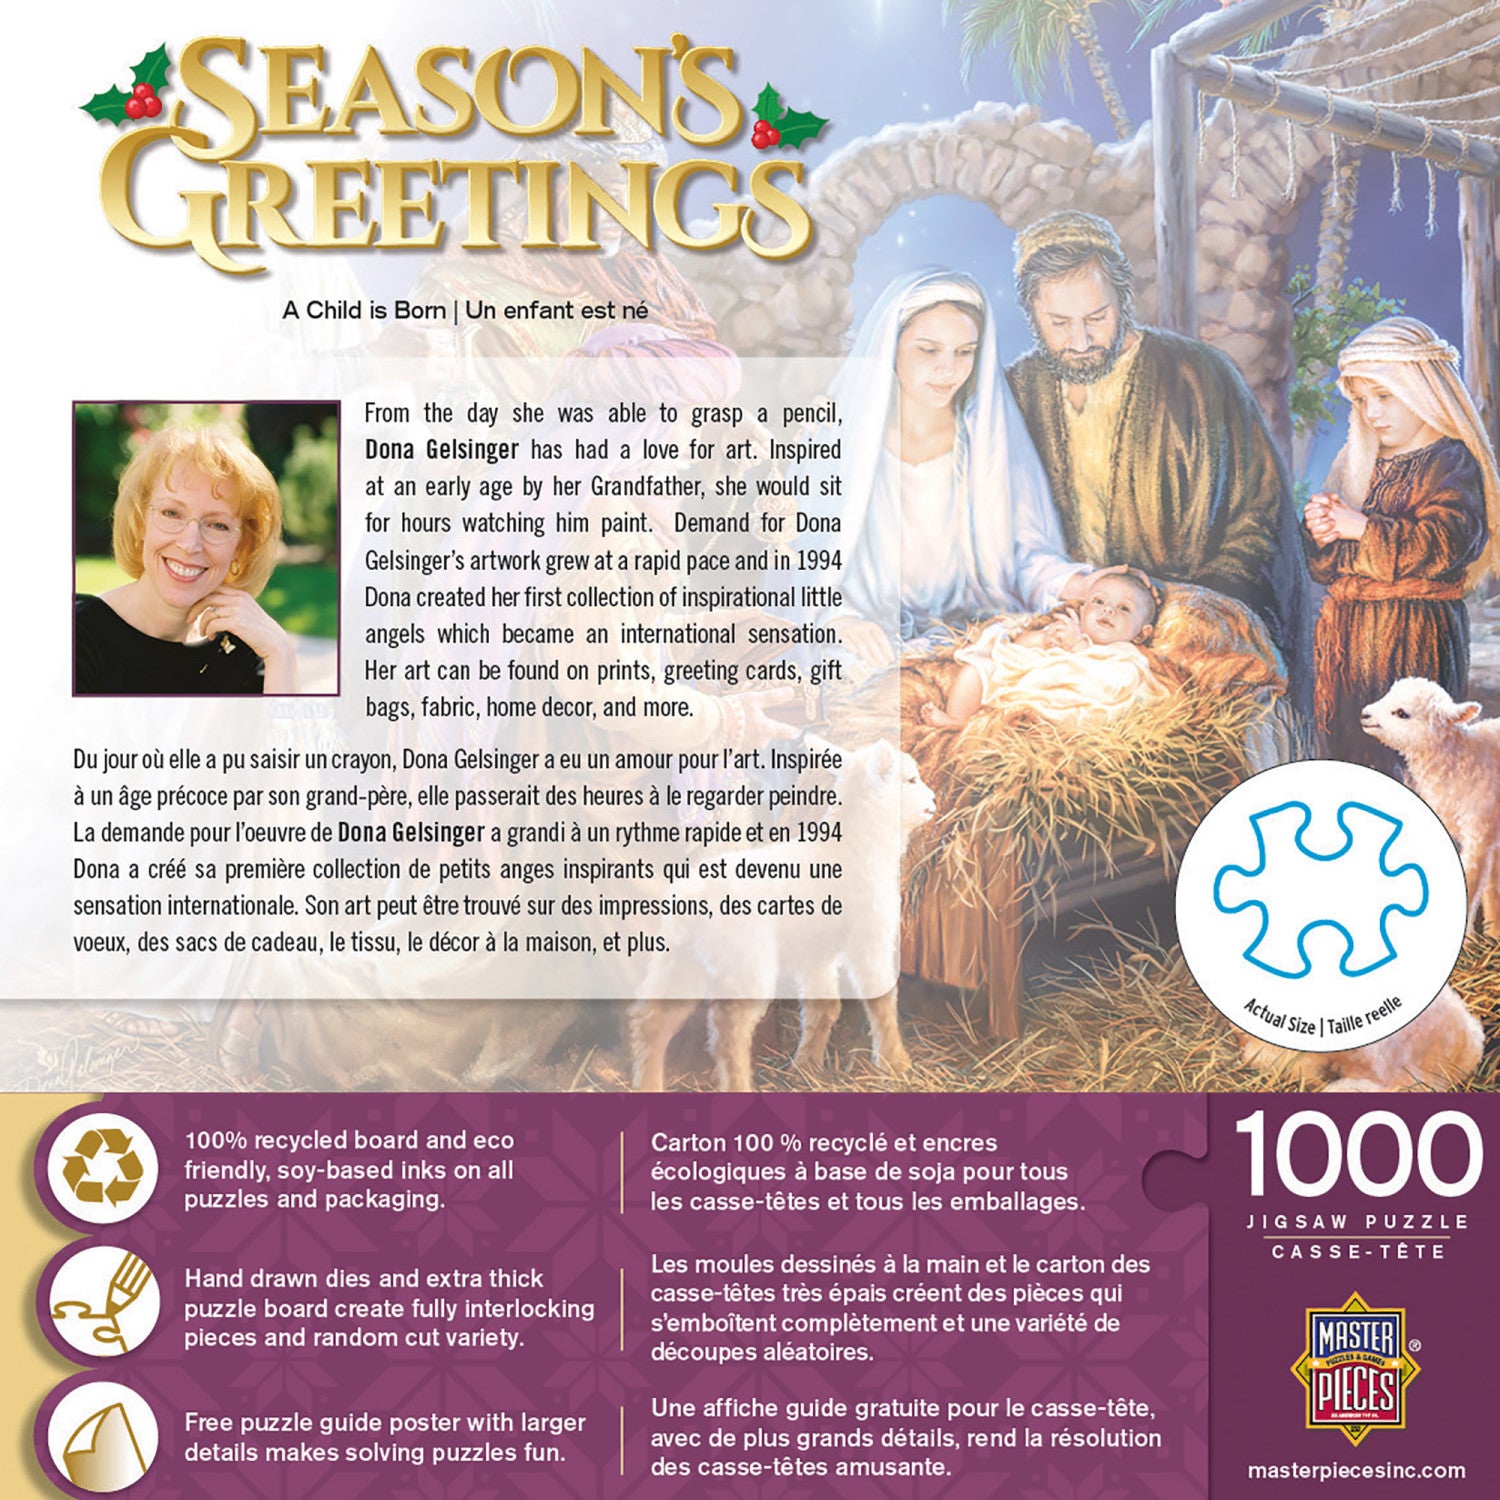 Season's Greetings - A Child is Born 1000 Piece Puzzle